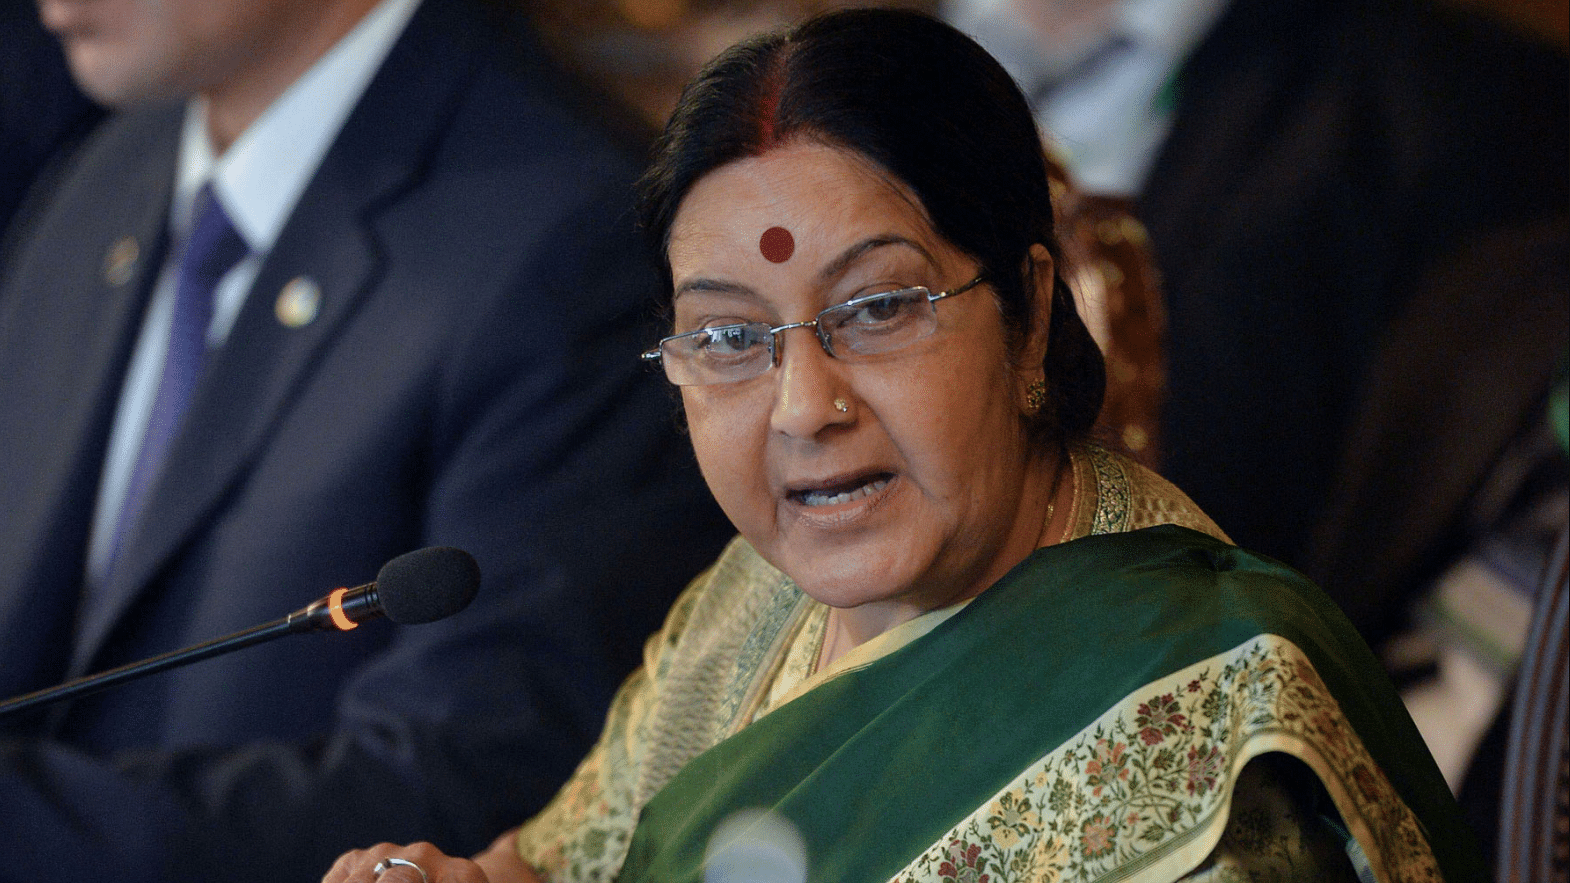 Minister of External Affairs Sushma Swaraj also told Rajya Sabha on Thursday, 27 December, that the “government of India was not involved in organising the visit and meetings”.